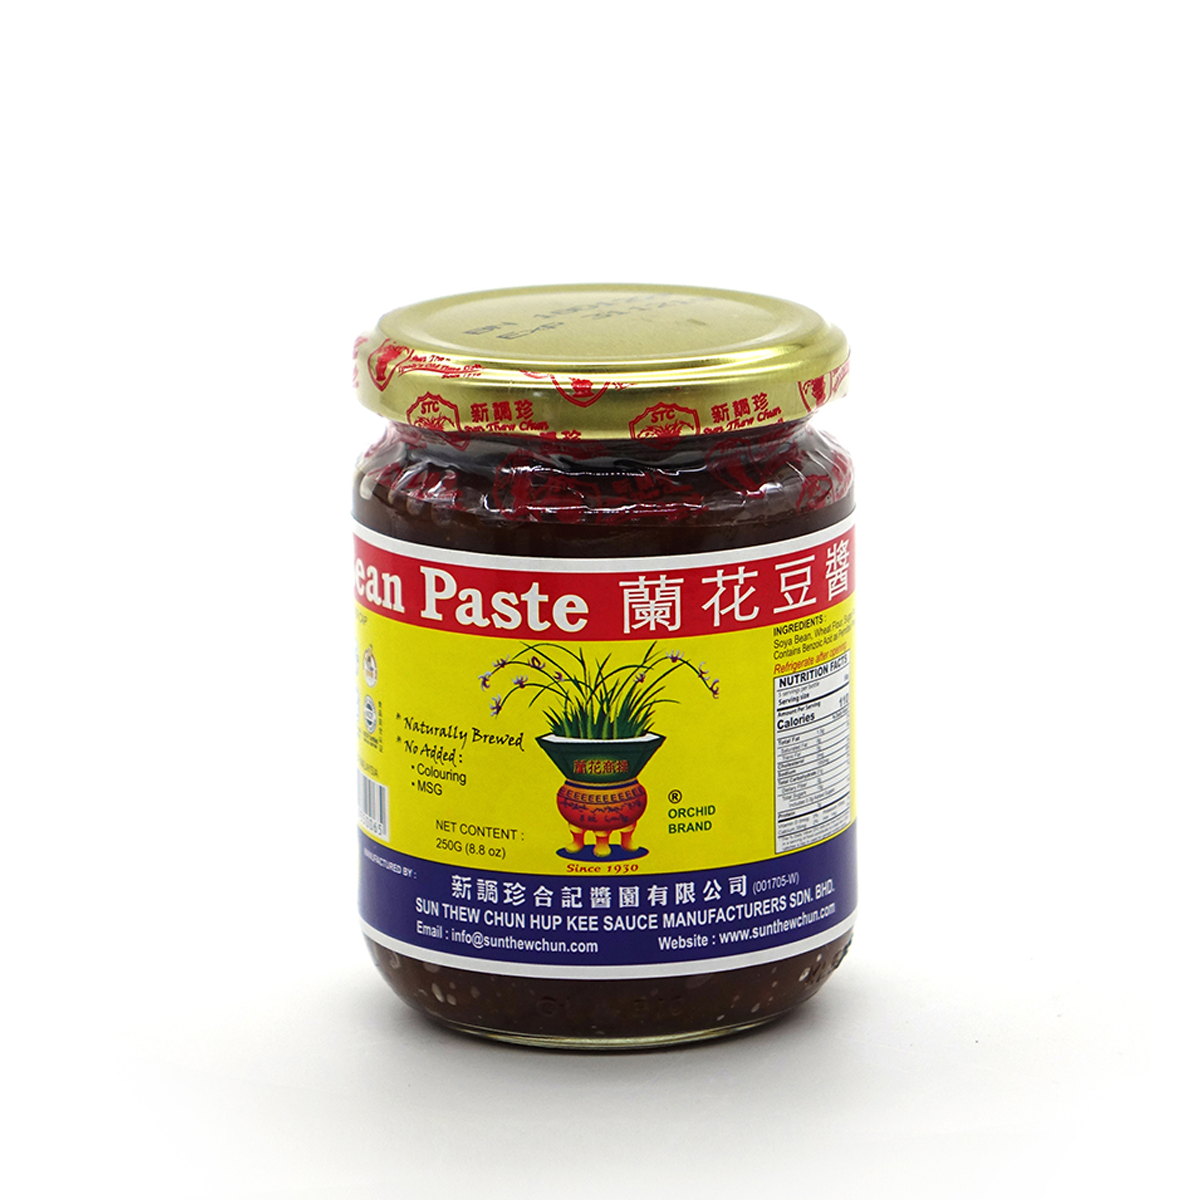 Orchid Brand Bean Paste (Minced)